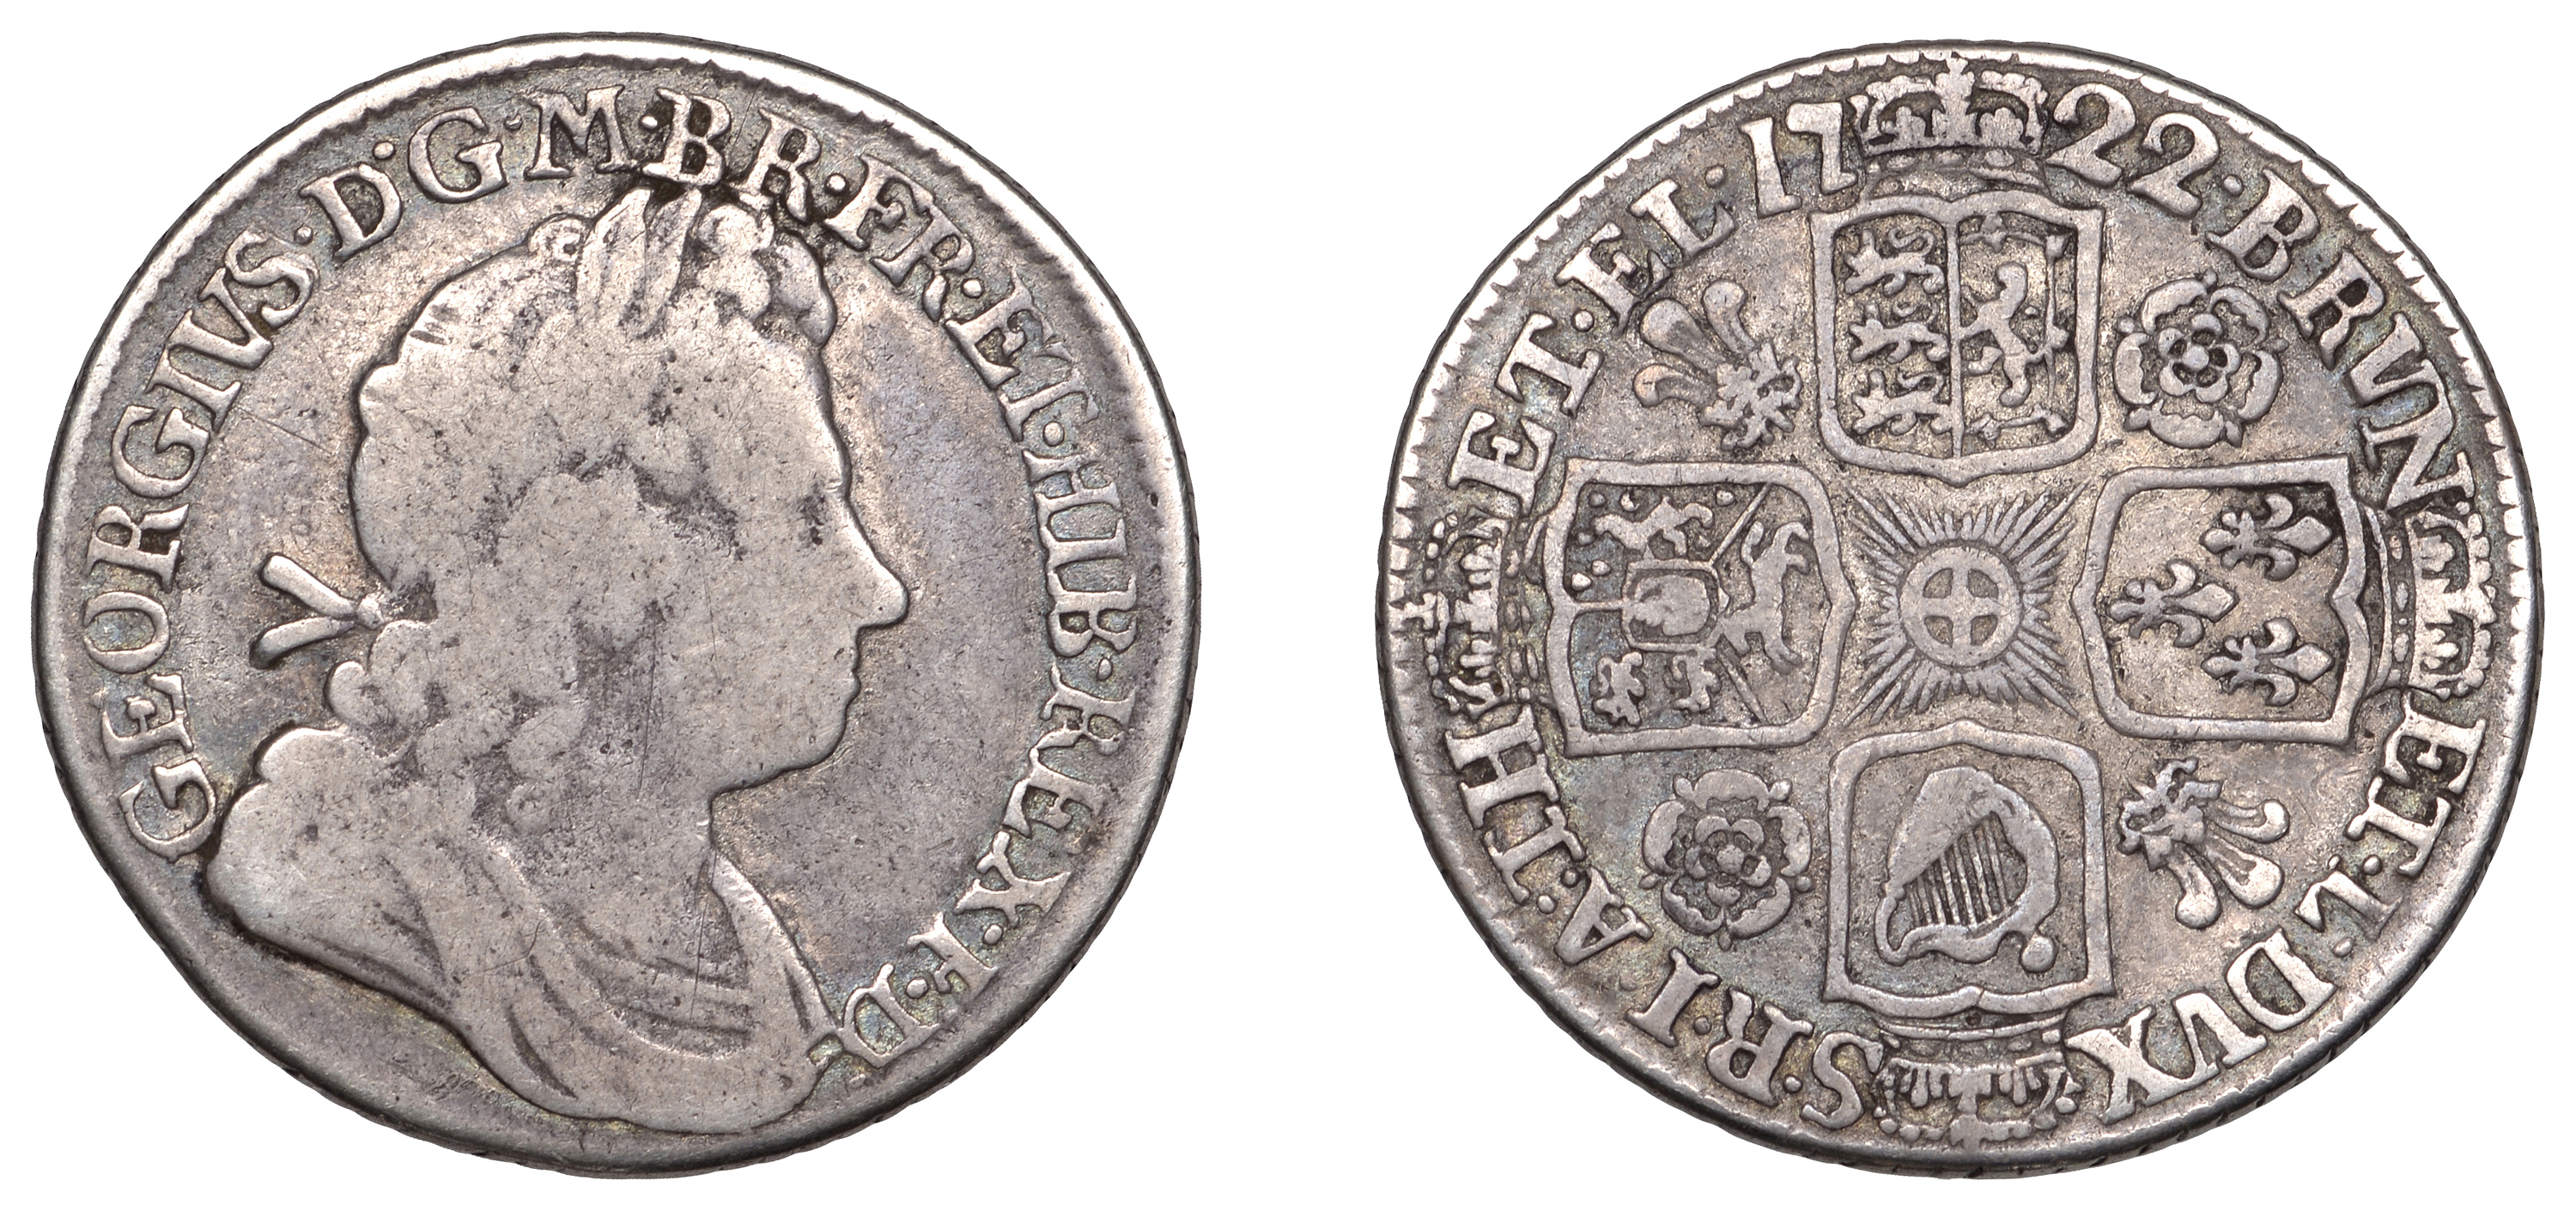 George I (1714-1727), Shilling, 1722, roses and plumes (ESC 1581; S 3645). Nearly fine, scar...